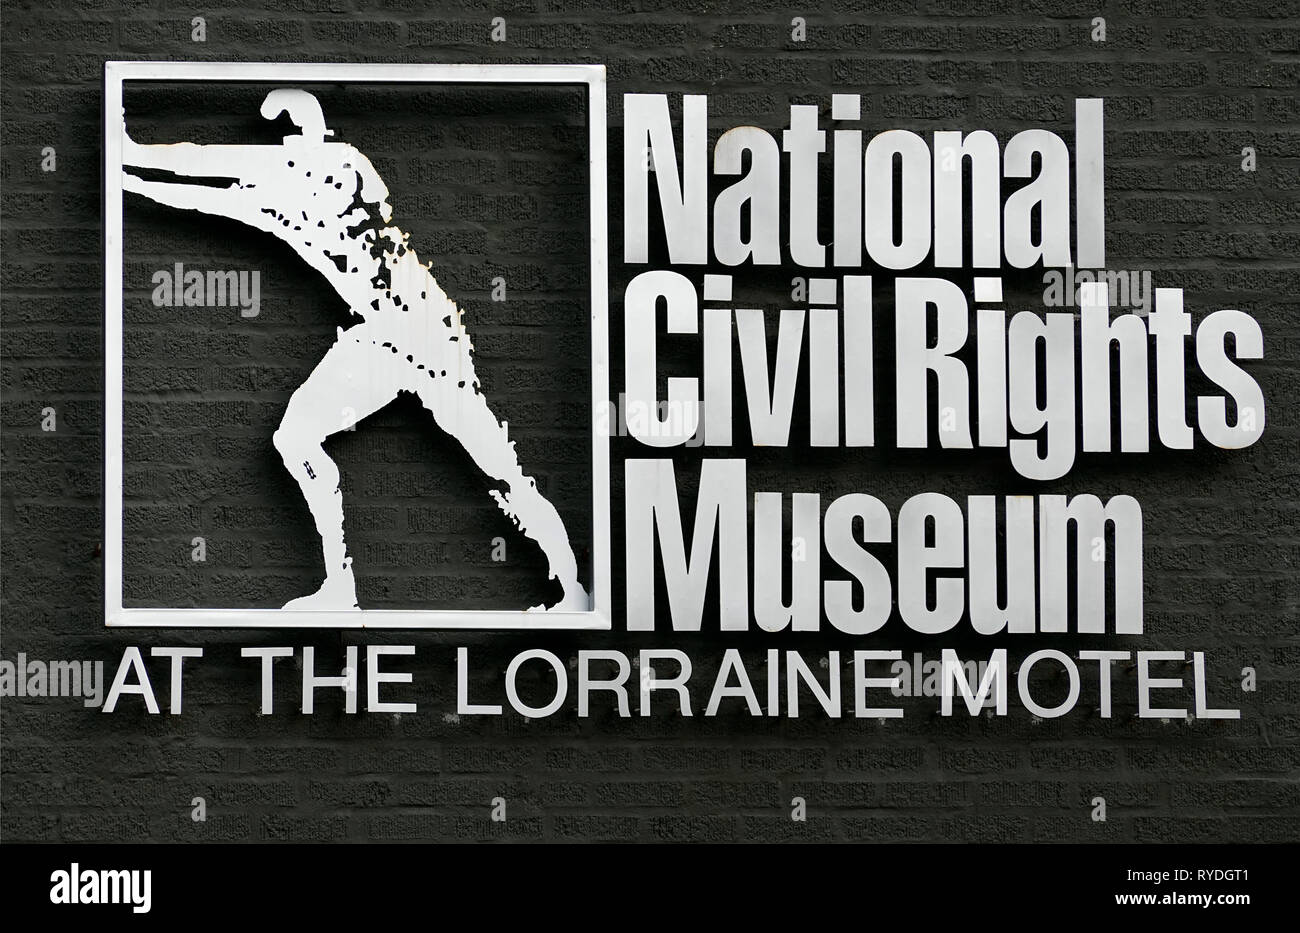 National Civil Rights Museum Memphis Tennessee Stock Photo